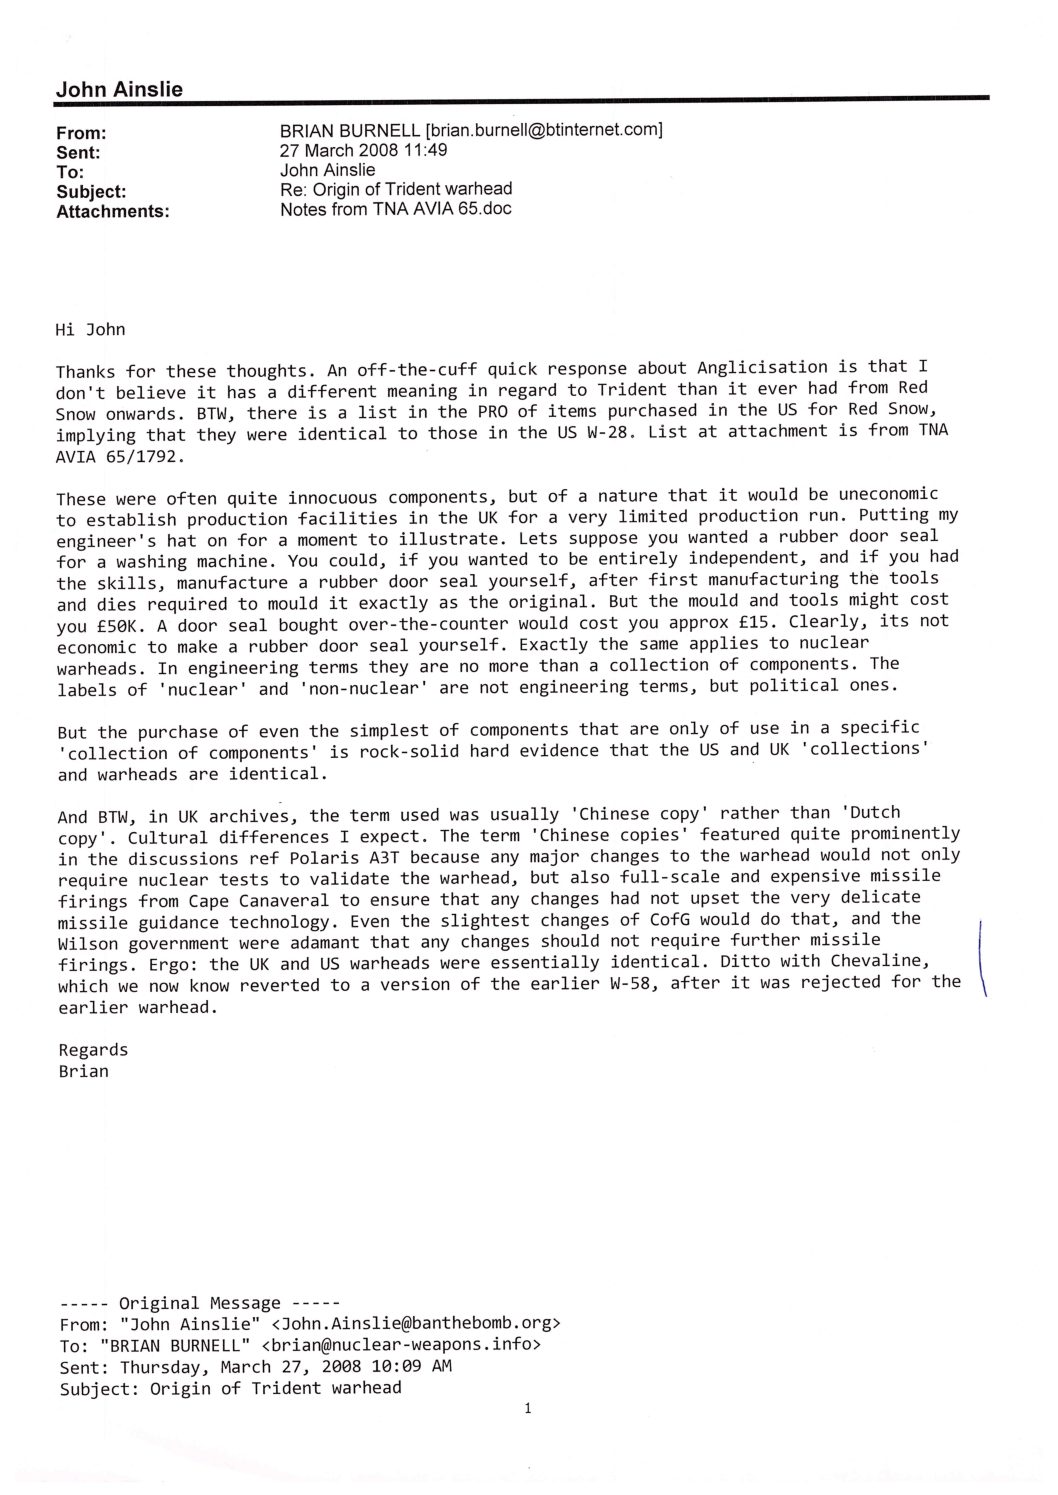 Brian Burnell, 'Email to John Ainslie, Re: Origin of Trident warhead ...